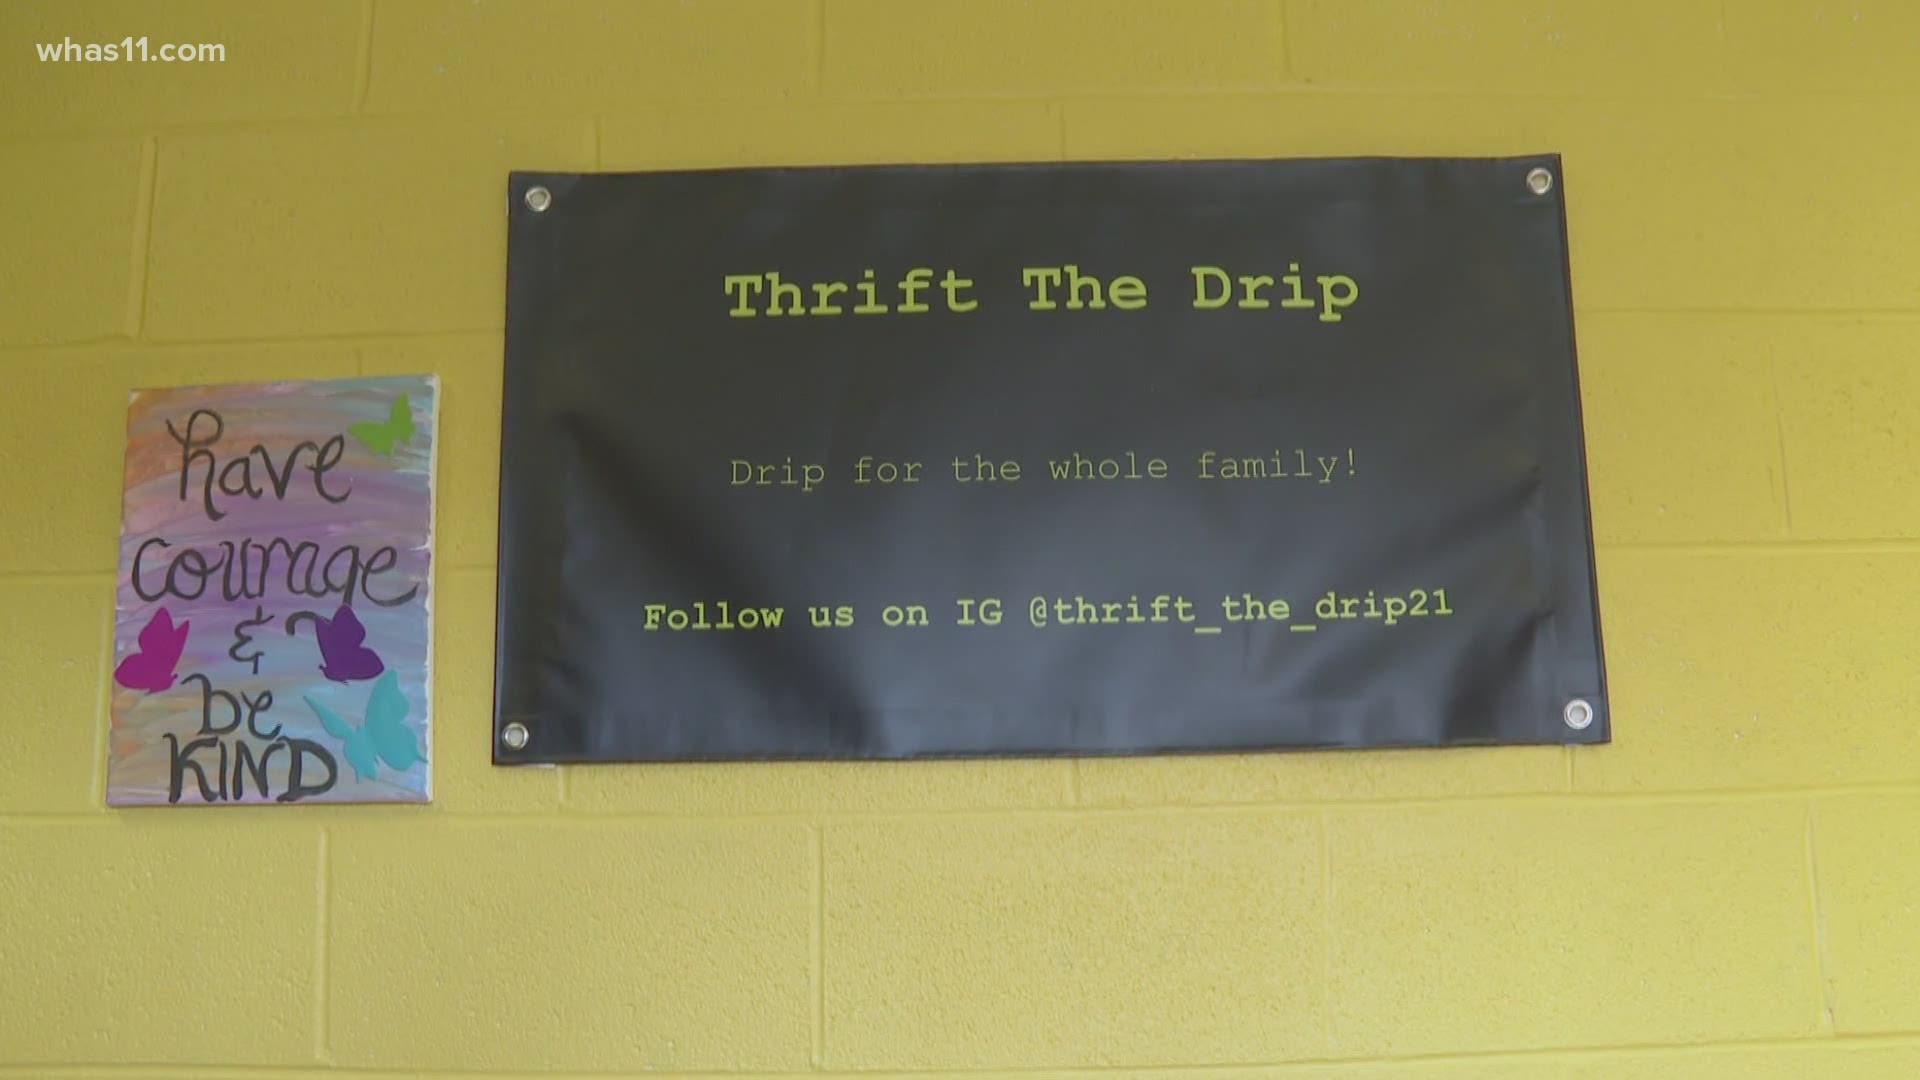 Thrift the Drip was created and designed by students at the Buttafly School in Louisville.